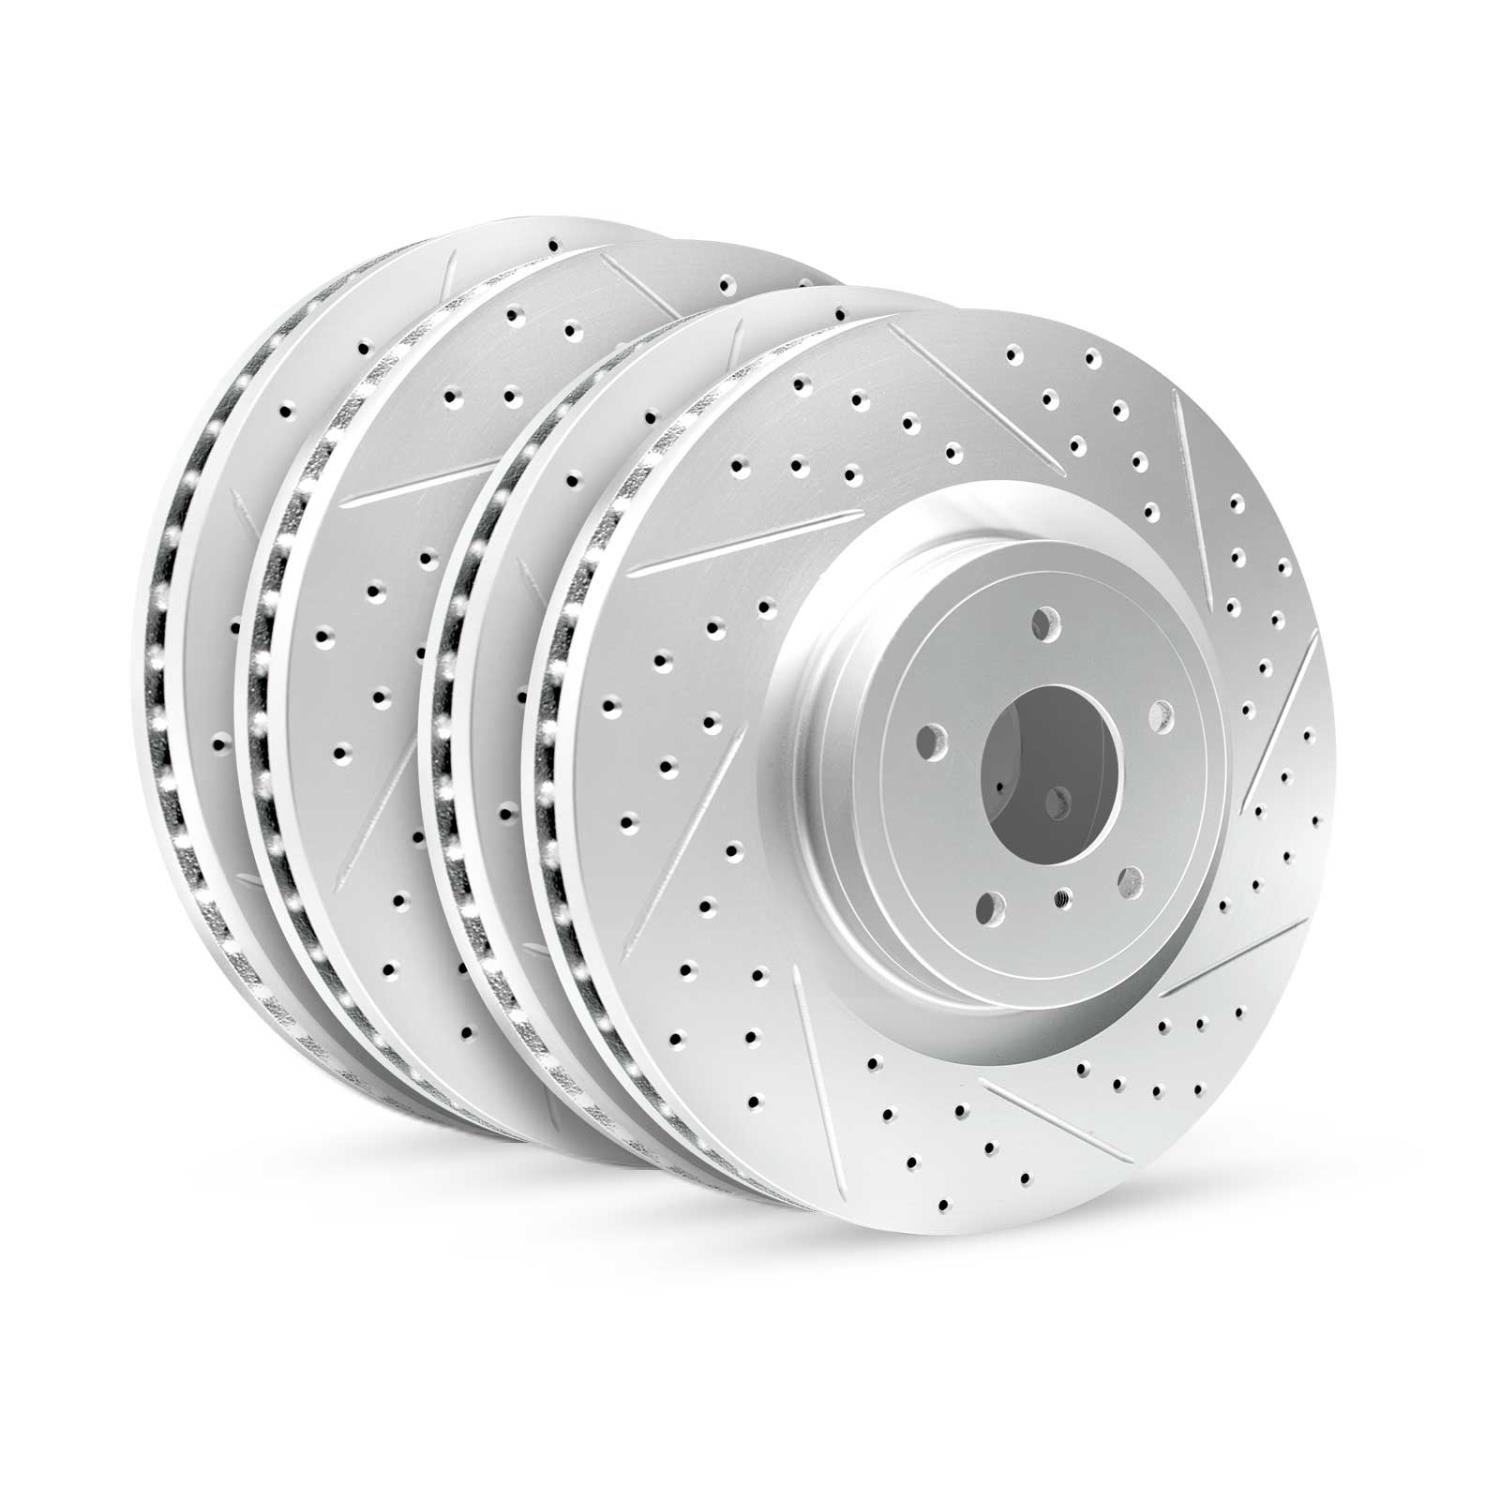 GEO-Carbon Drilled/Slotted Rotors, 2012-2016 Kia/Hyundai/Genesis, Position: Front/Rear